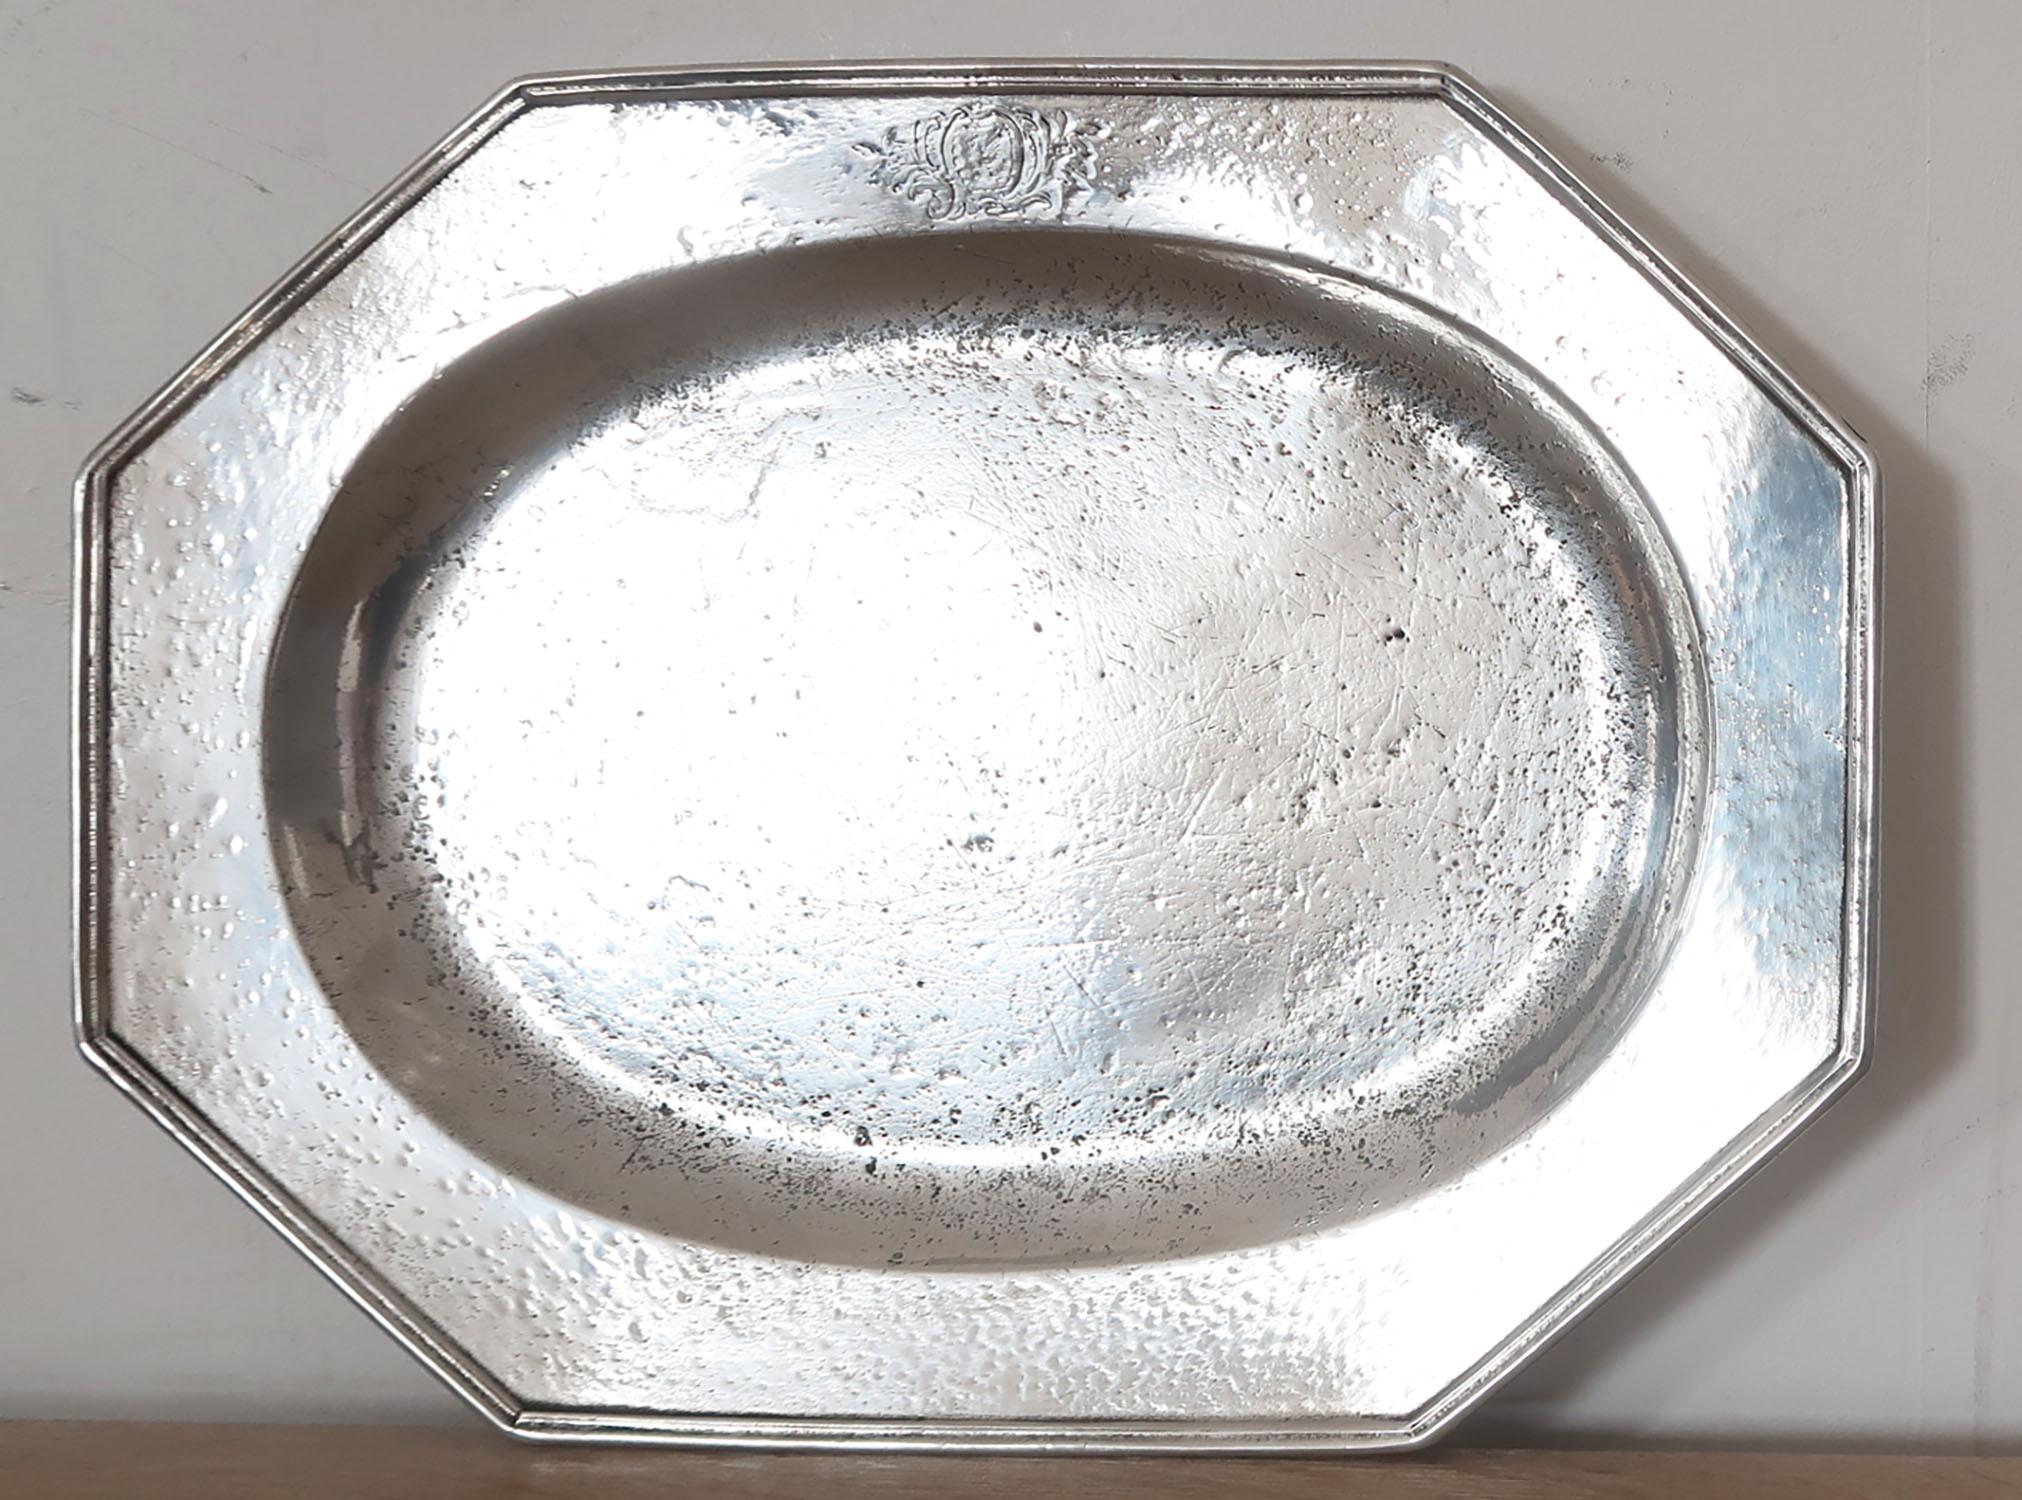 Fabulous pewter meat plate with armorial

English, 18th century

Amazing patina

Traces of the London touch mark on the underside

The pewter has been polished to its original shine to imitate polished silver. It was known as the Poor Man's